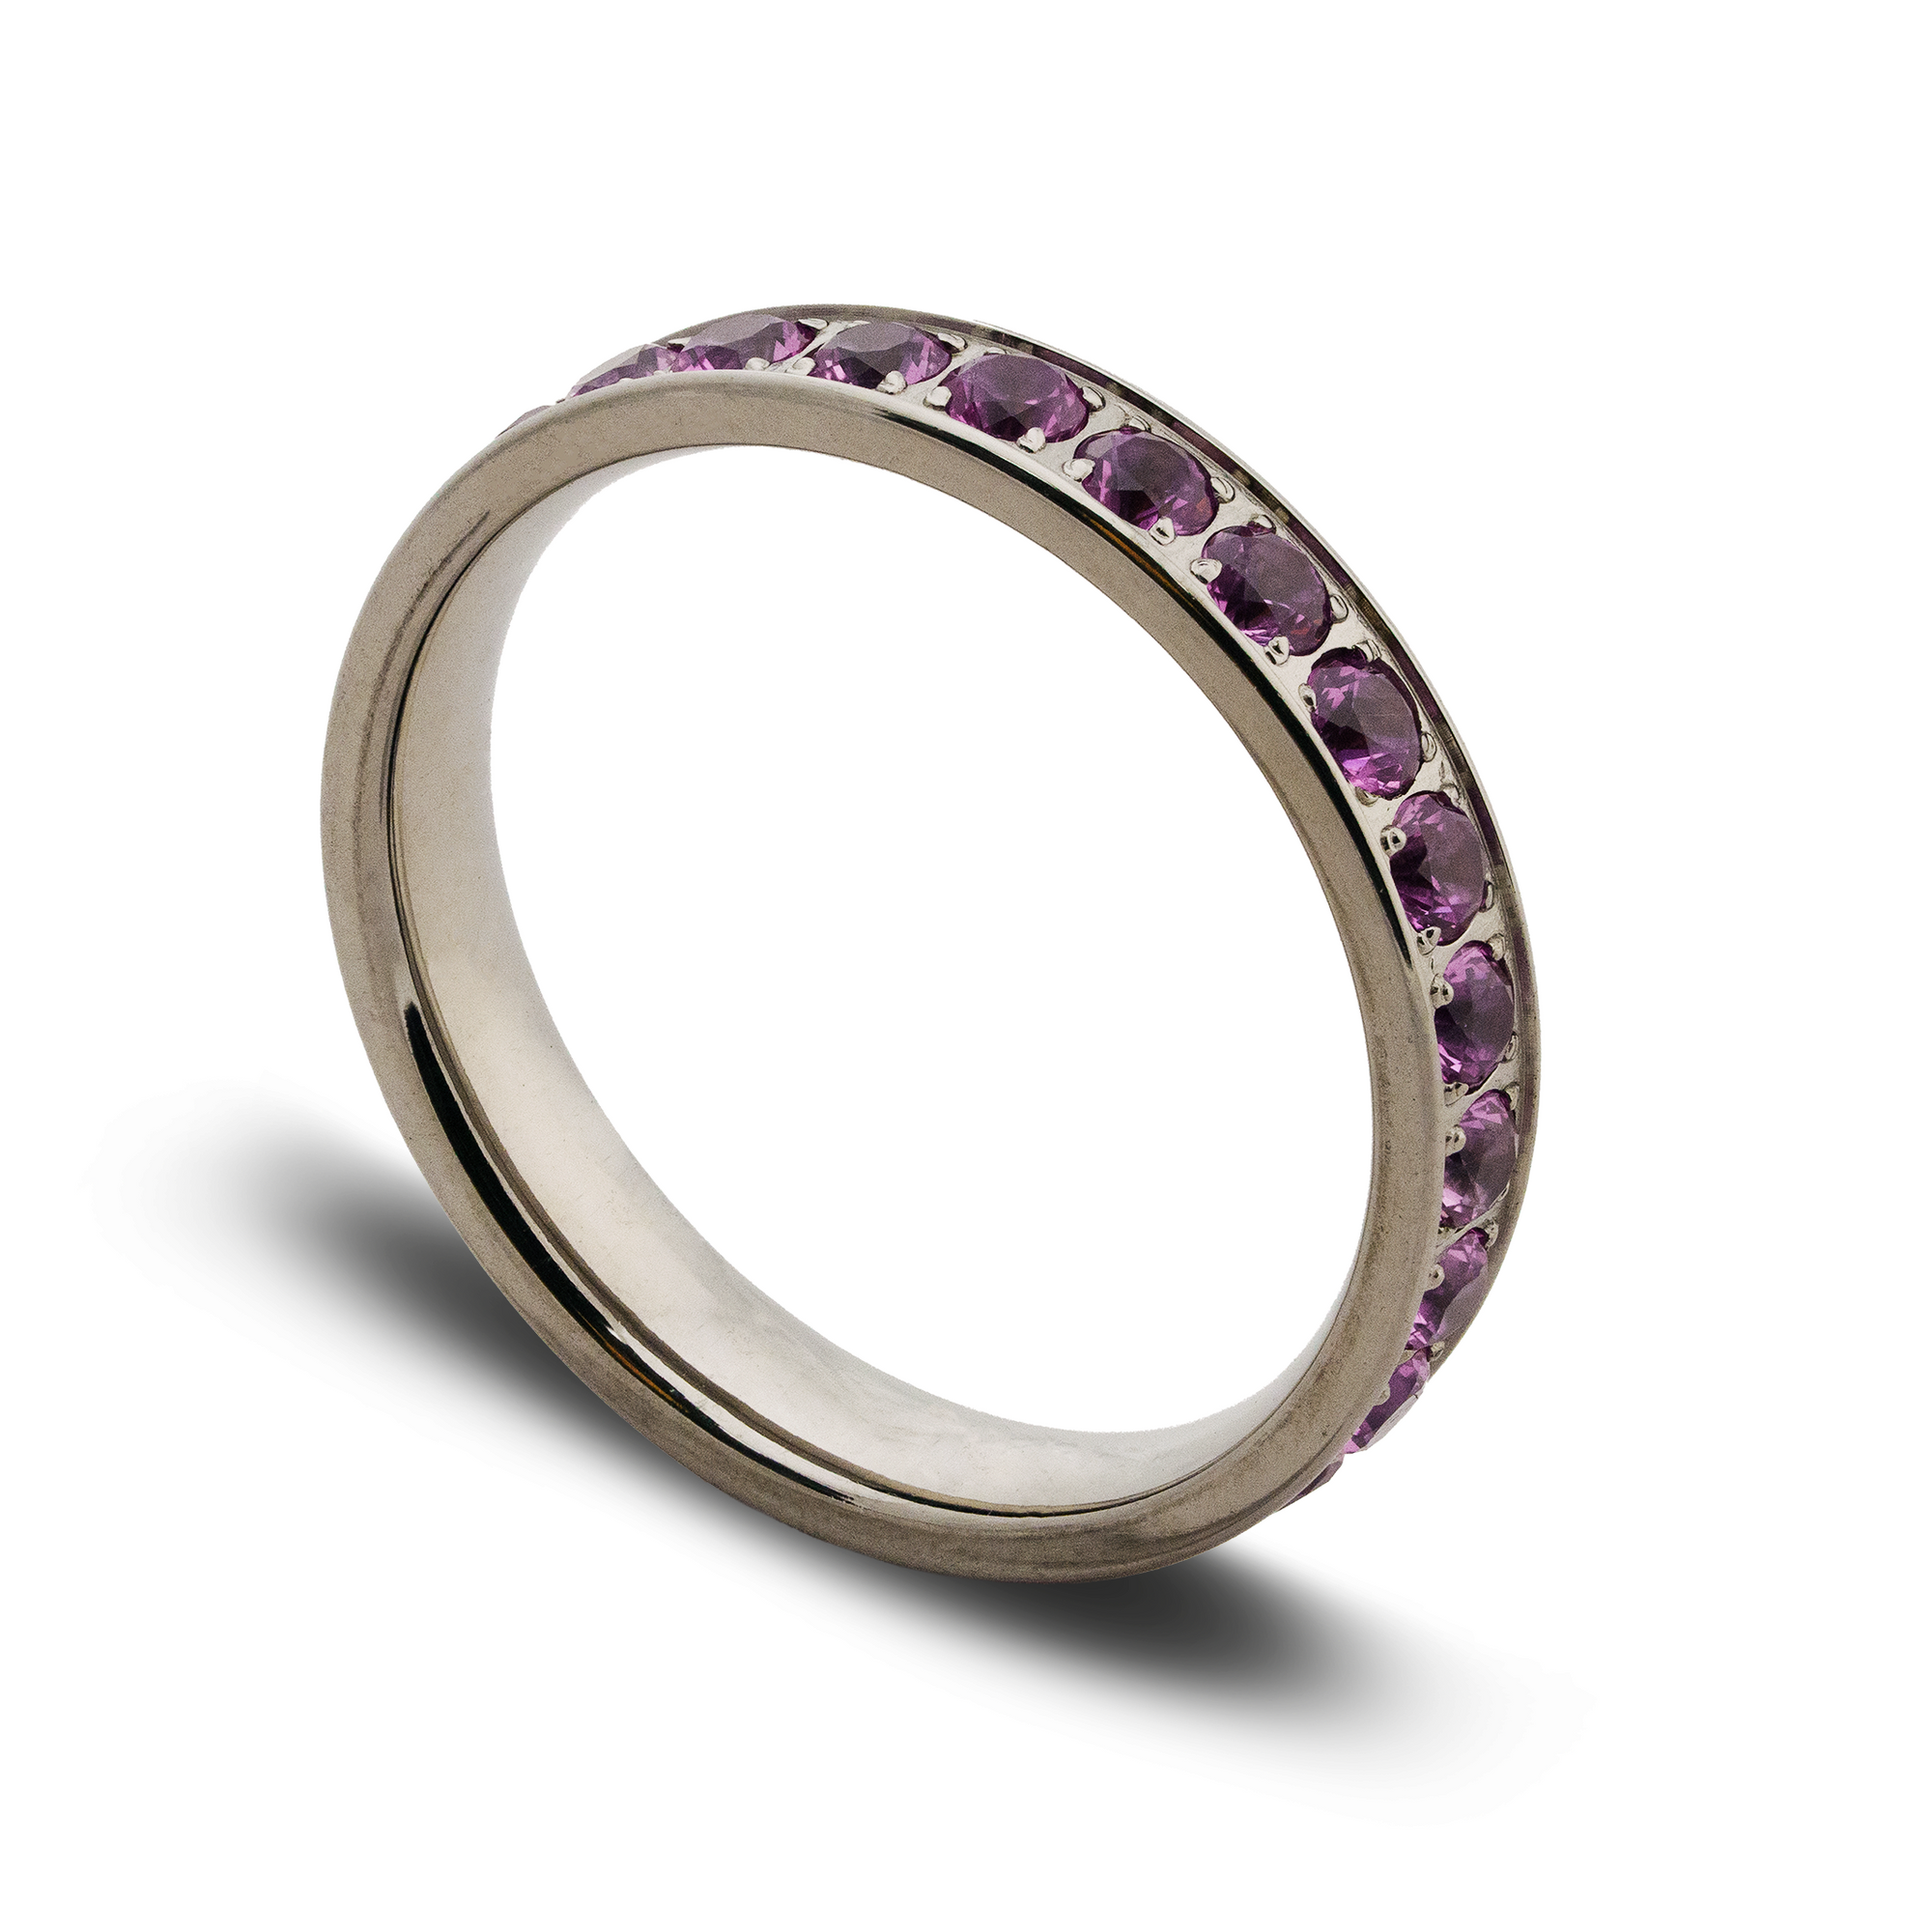 The “Violet” Ring